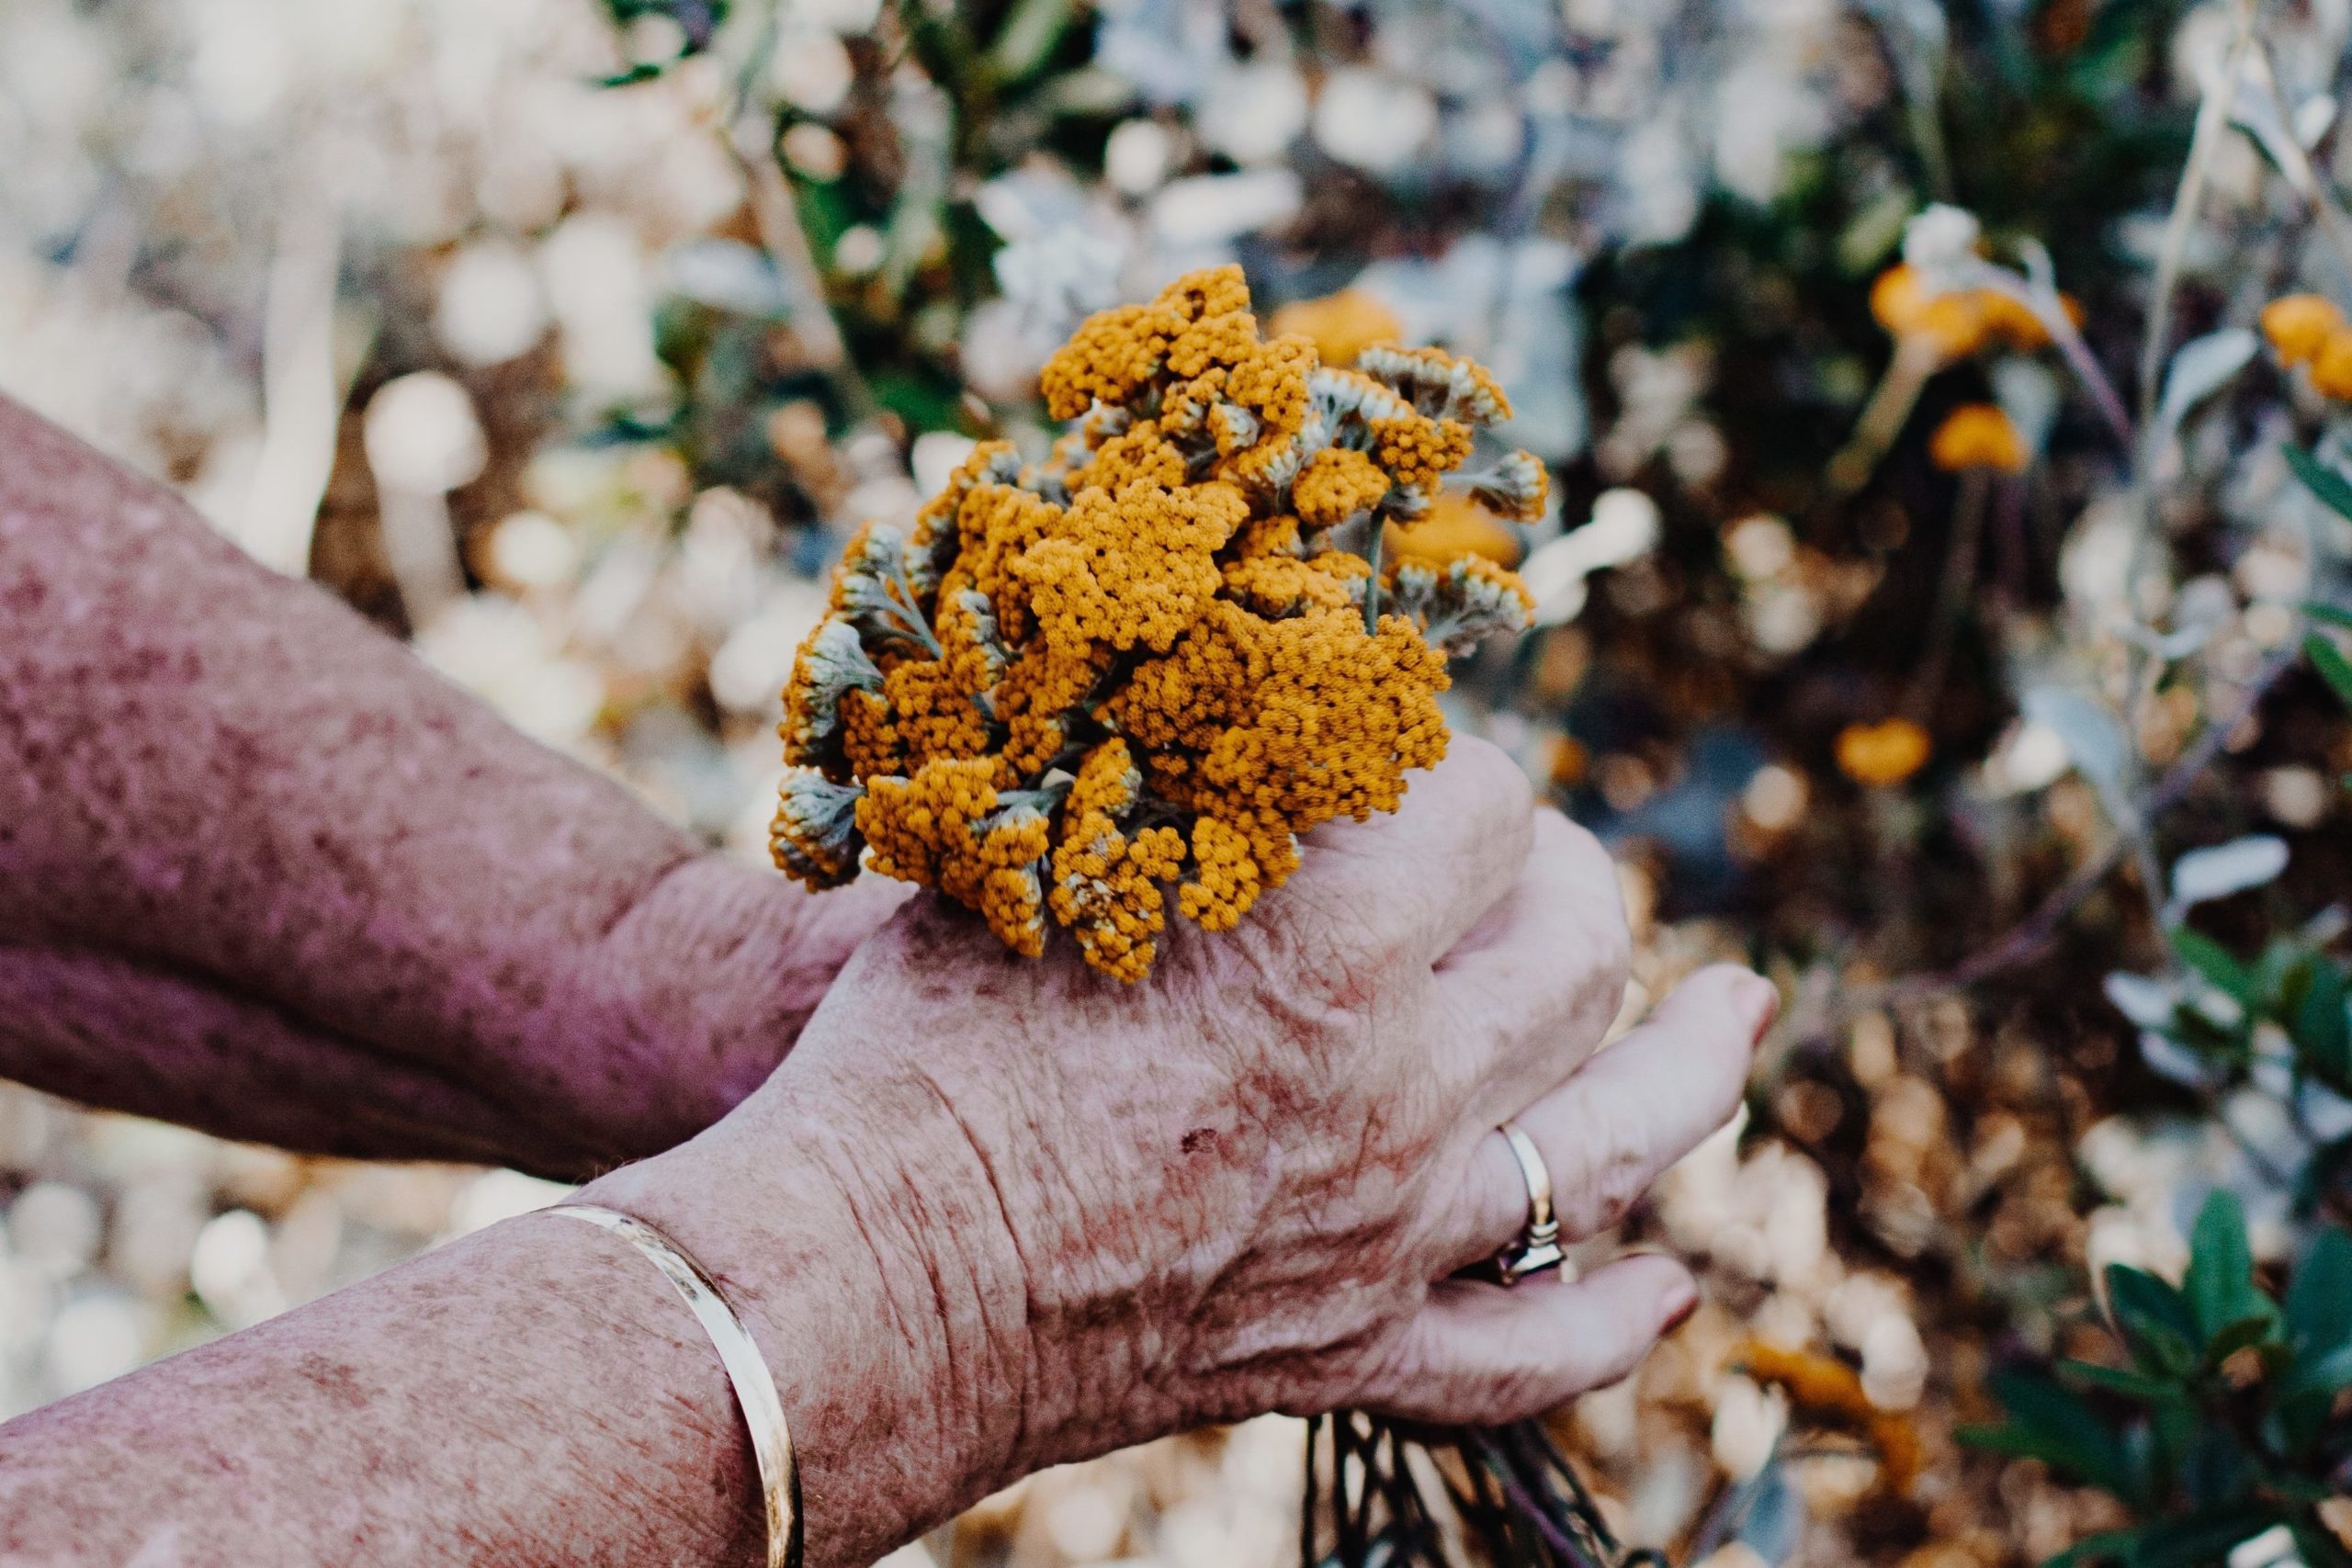 Woman holding a bunch of wild flowers. Her hands are wrinkled and old. She has a wedding ring and a gold bracelet on her wrist.